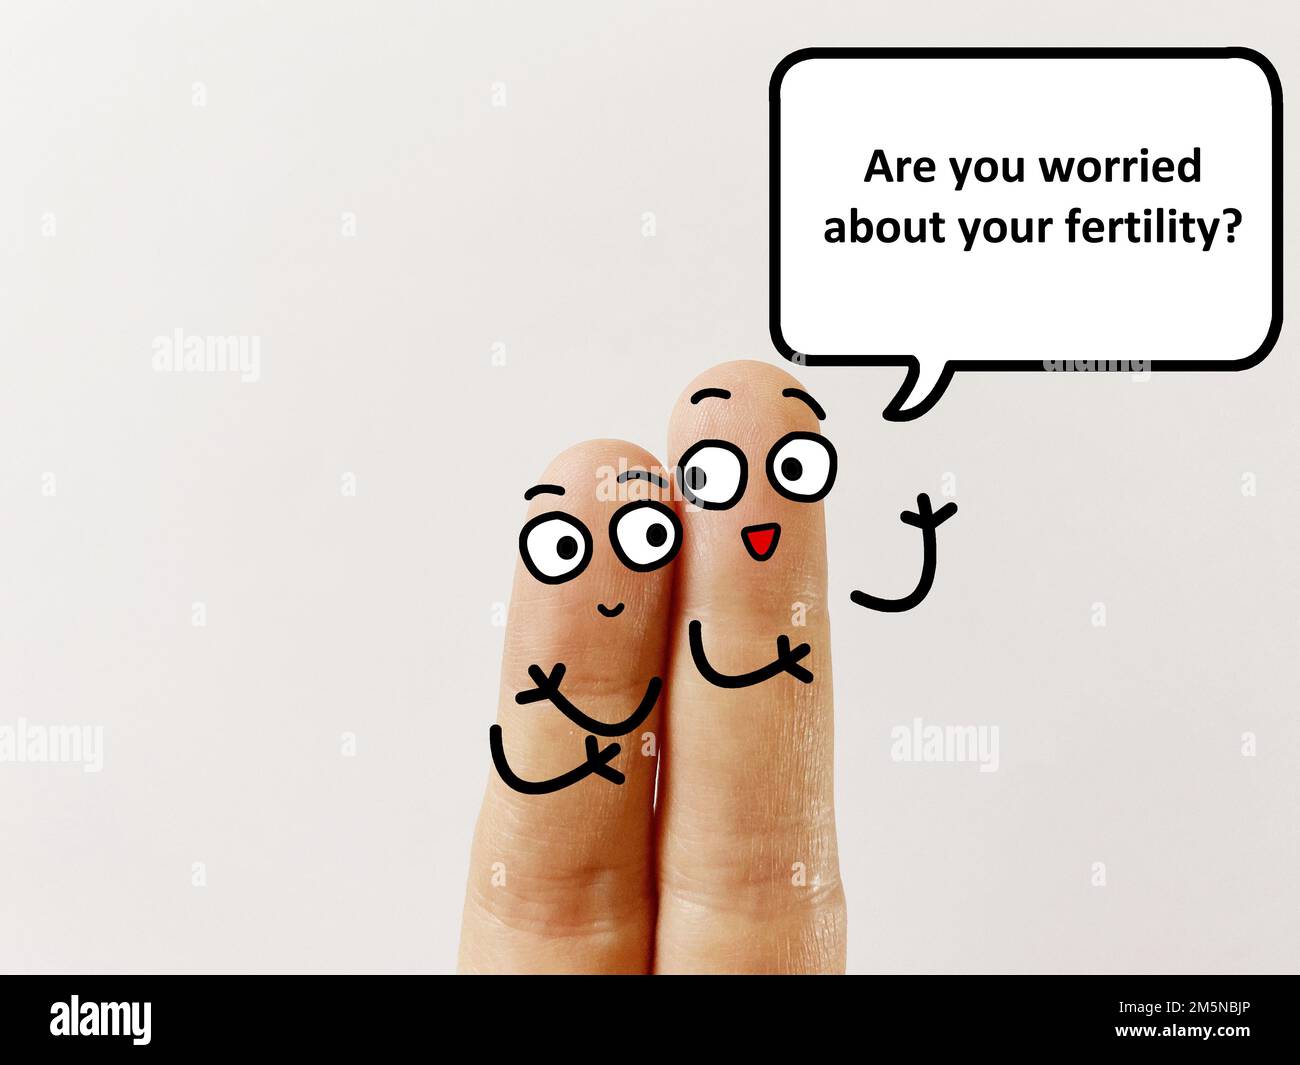 Two fingers are decorated as two person. One of them is asking if she is worried about her fertility. Stock Photo